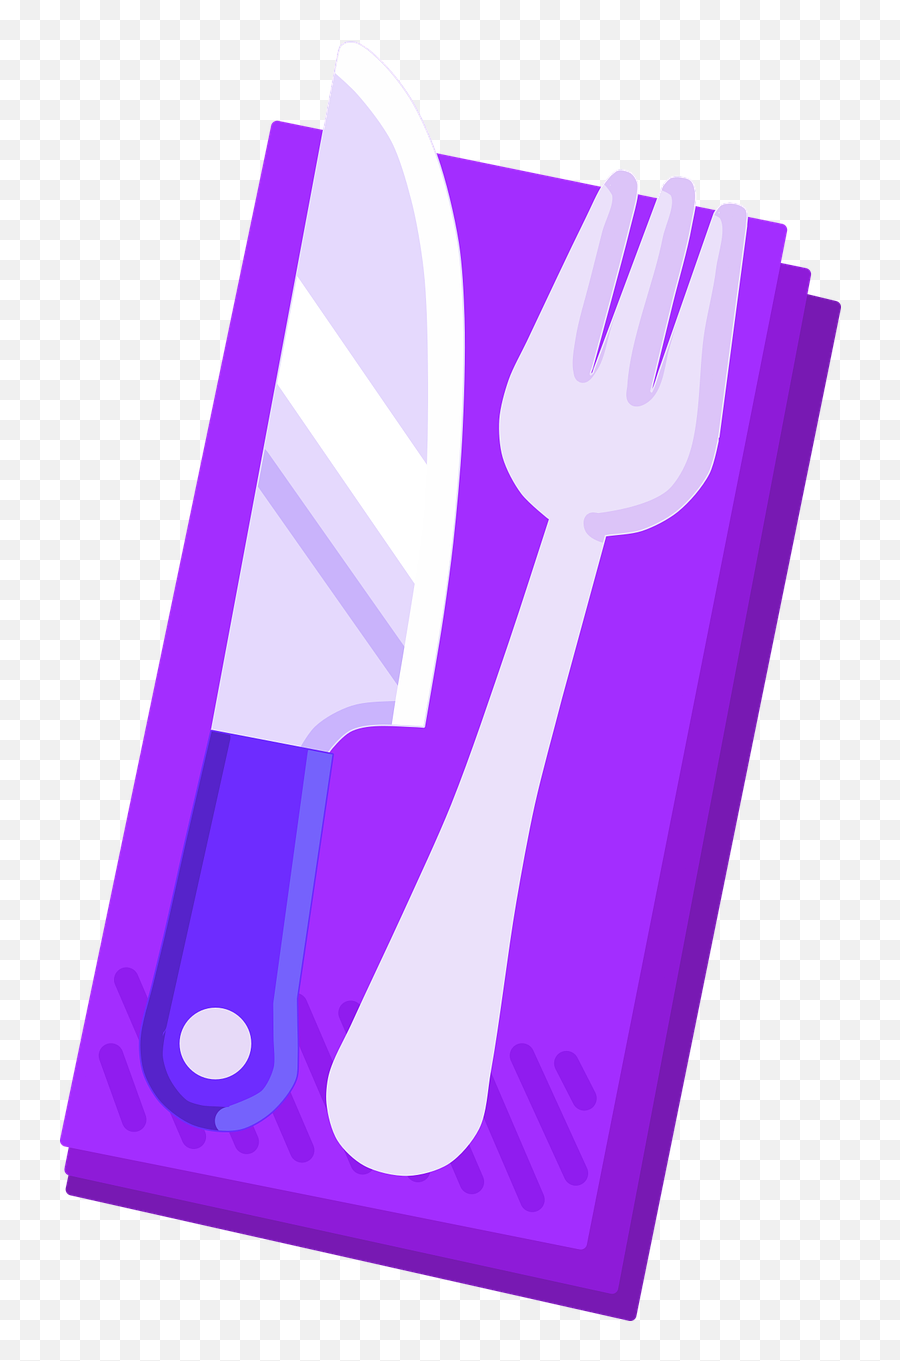 Fork Knife Cutlery - Free Vector Graphic On Pixabay Fork Png,Fork Knife Spoon Icon